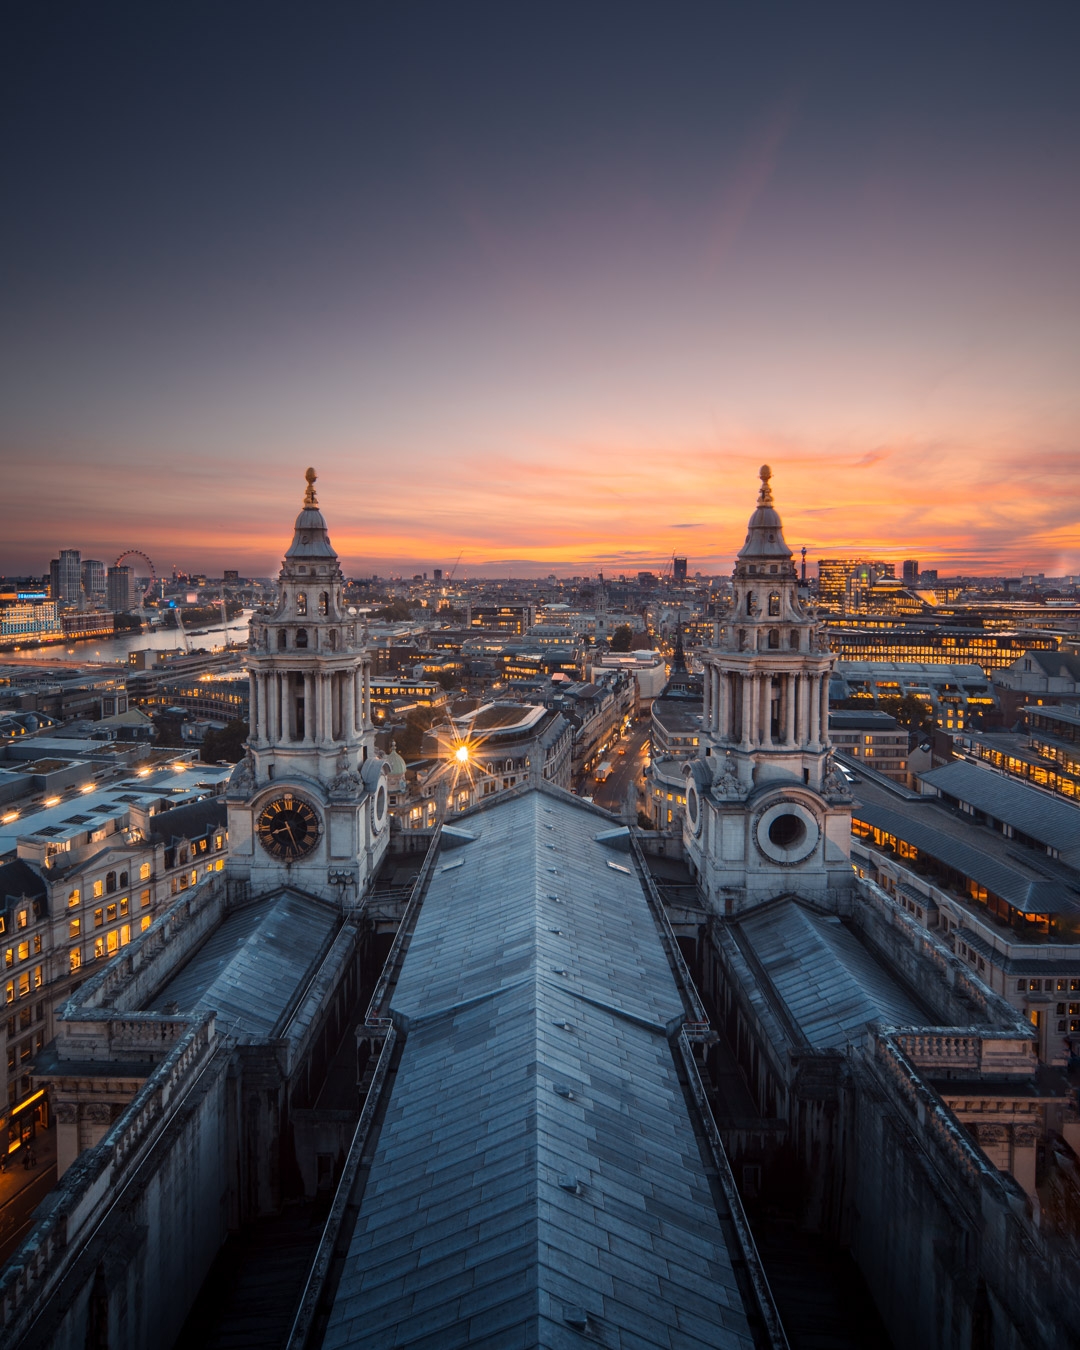 ‘Summer at St Paul’s’ by @theliamman – London